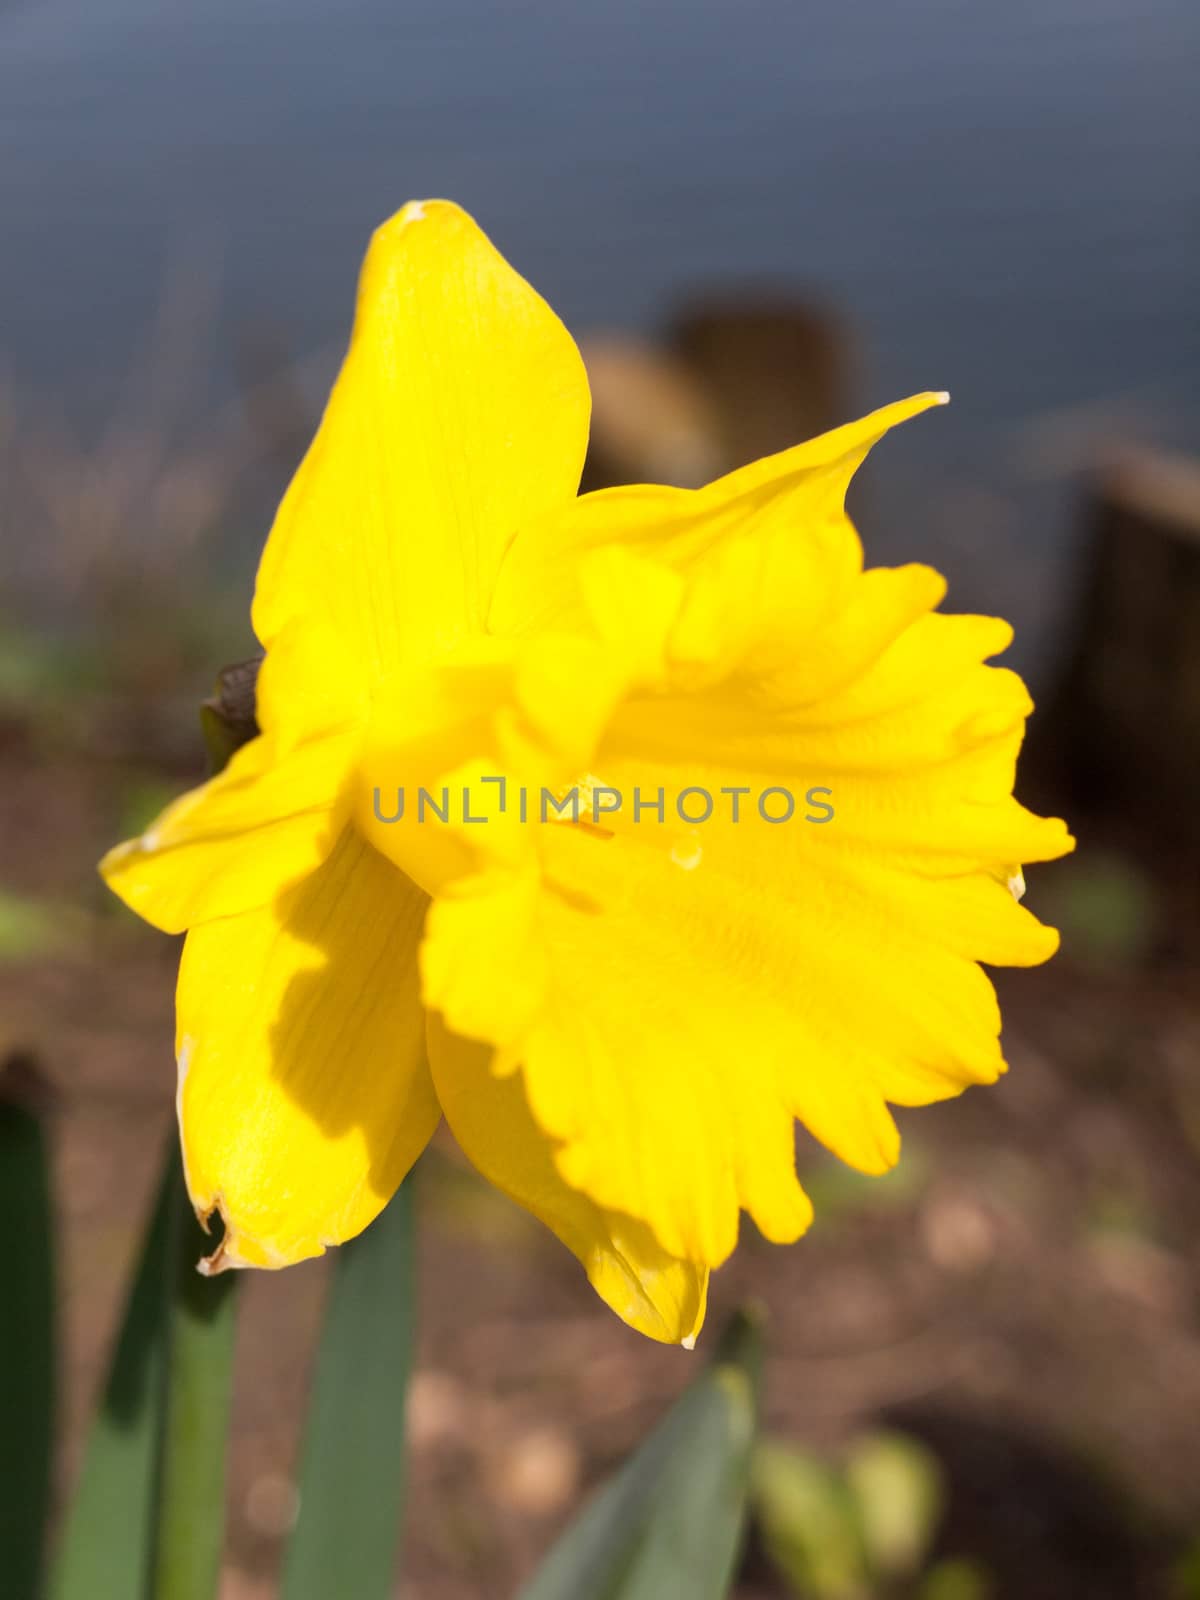 Gorgeous daffodils blooming in full in spring